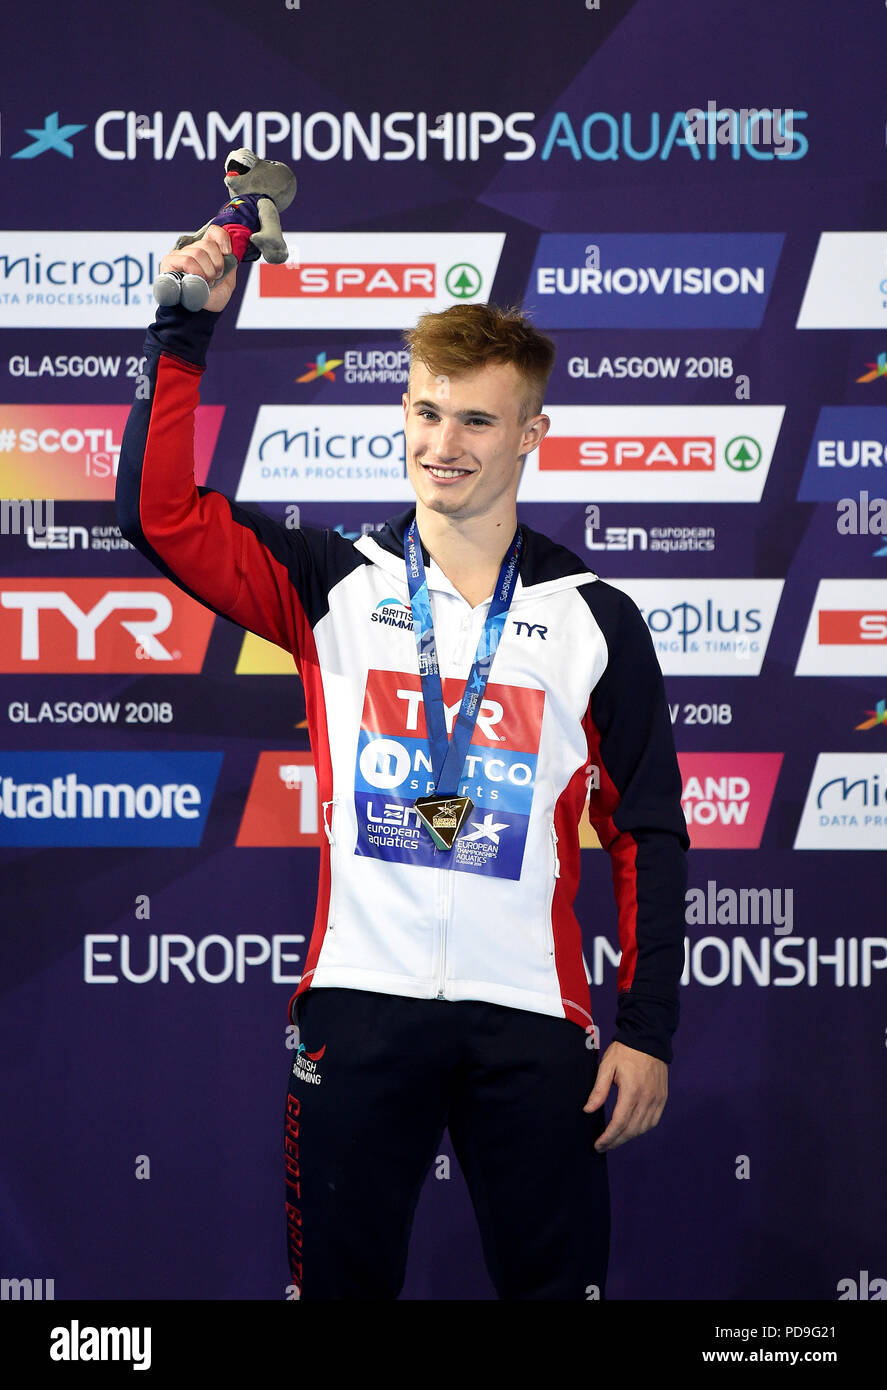 Great Britain's Jack Laugher celebrates with his gold medal in the Men's 1m Springboard Final during day six of the 2018 European Championships at Scotstoun Sports Campus, Glasgow. Stock Photo